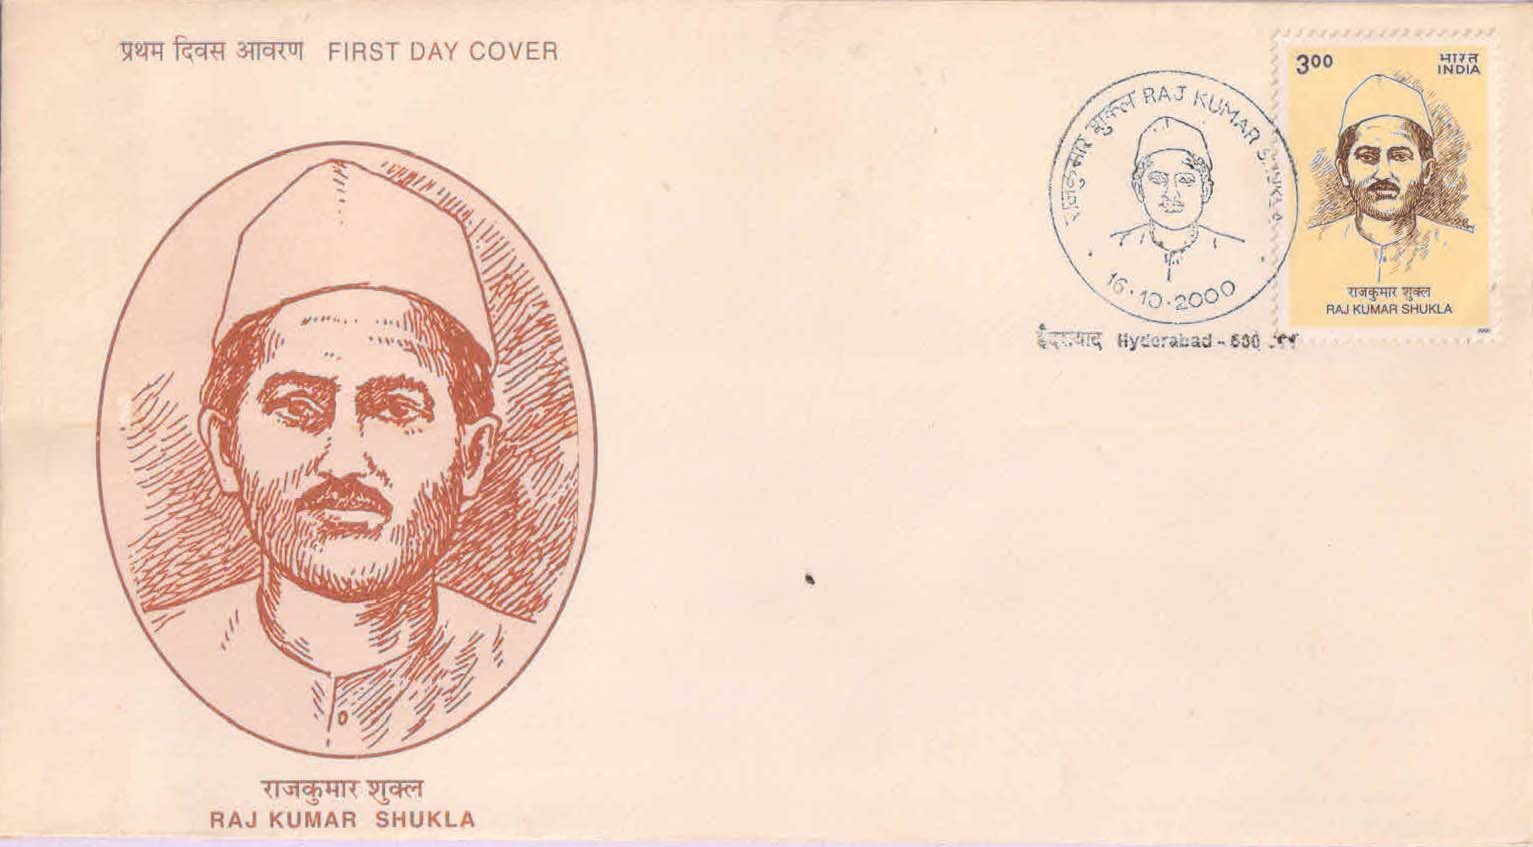 INDIA 16-10-2000, Raj Kumar Shukla, 1 Value on First Day Cover